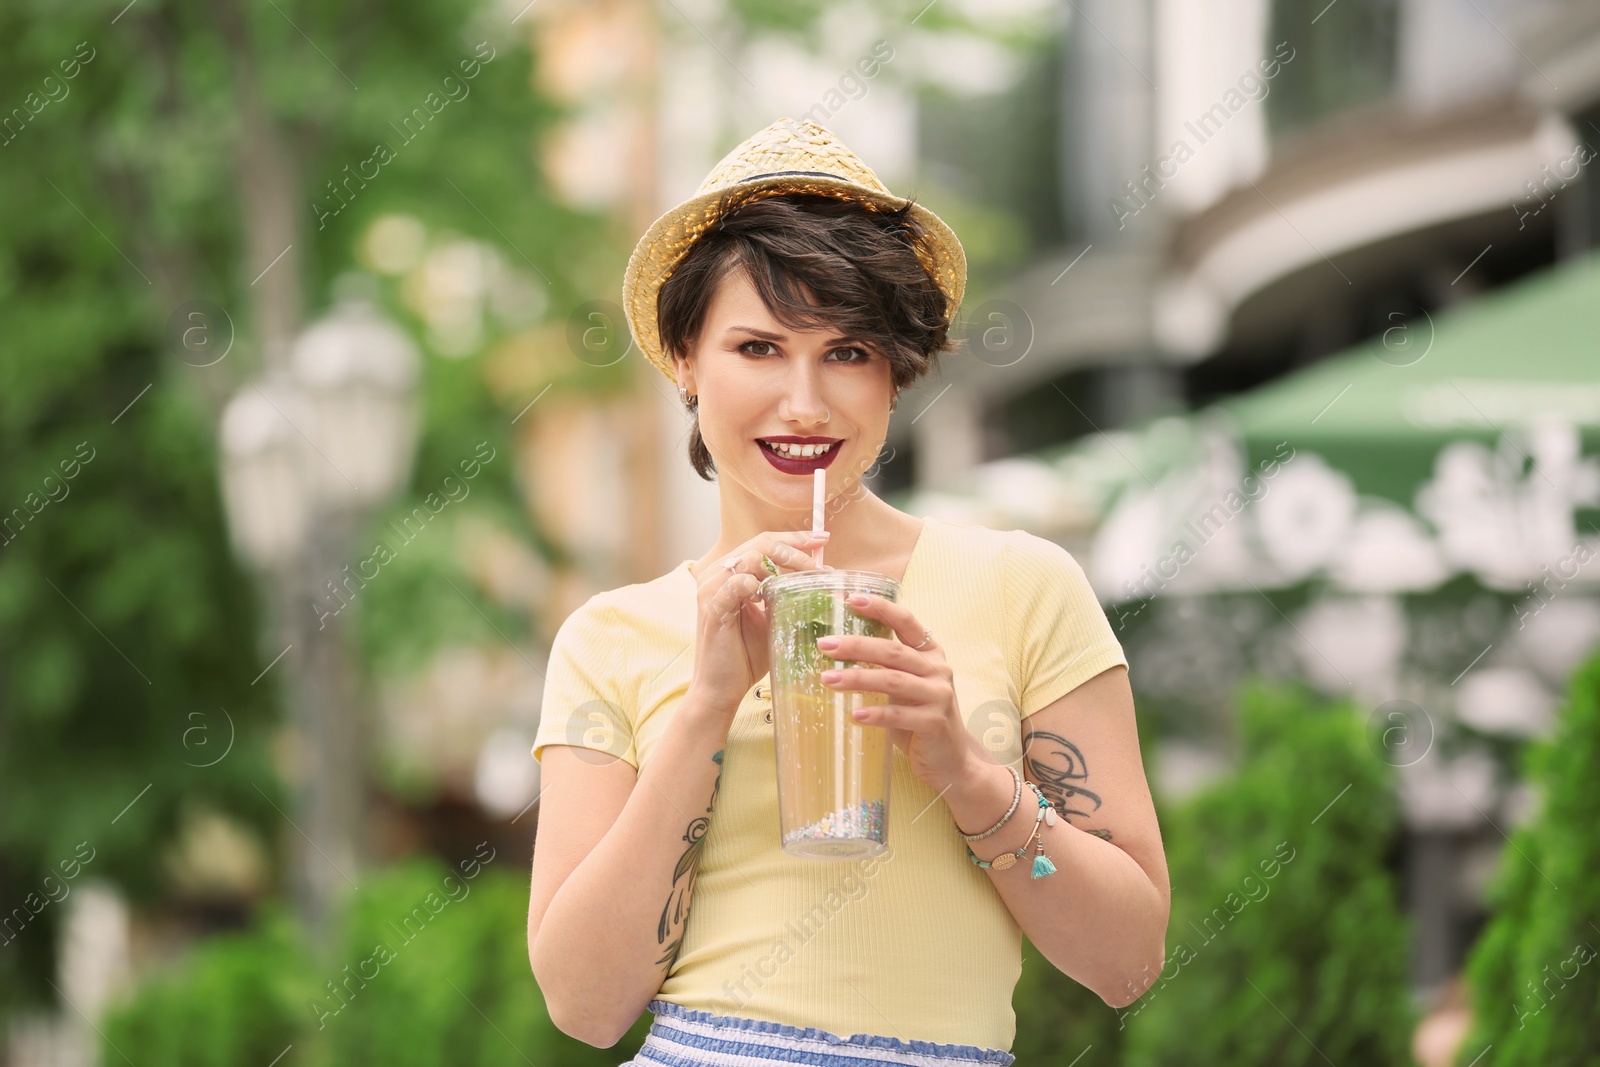 Photo of Young woman with cup of tasty lemonade outdoors